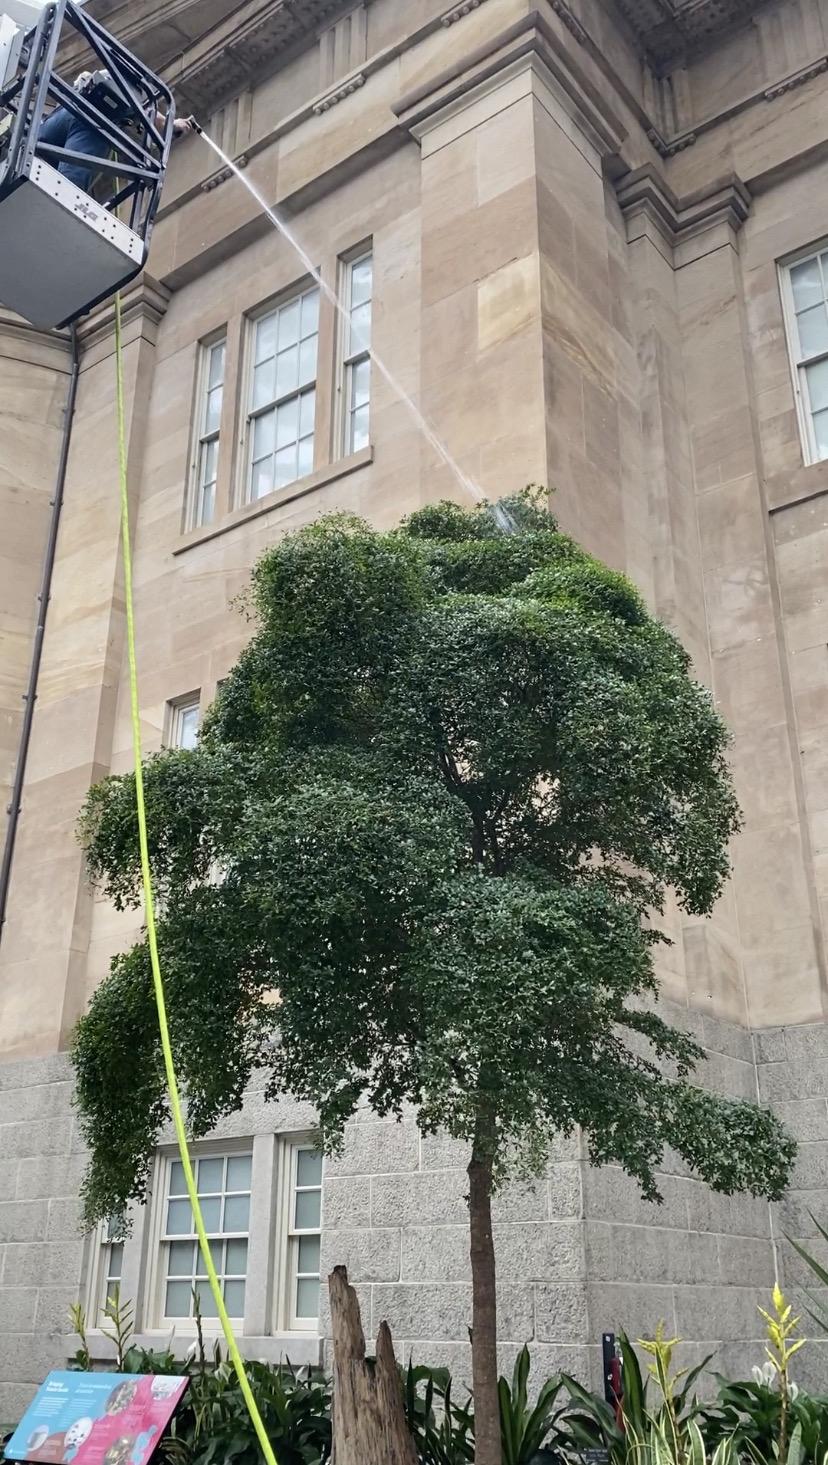 Smithsonian horticulturalists use a lift and a hose to wash a tree in the Kogod Courtyard at the museum.